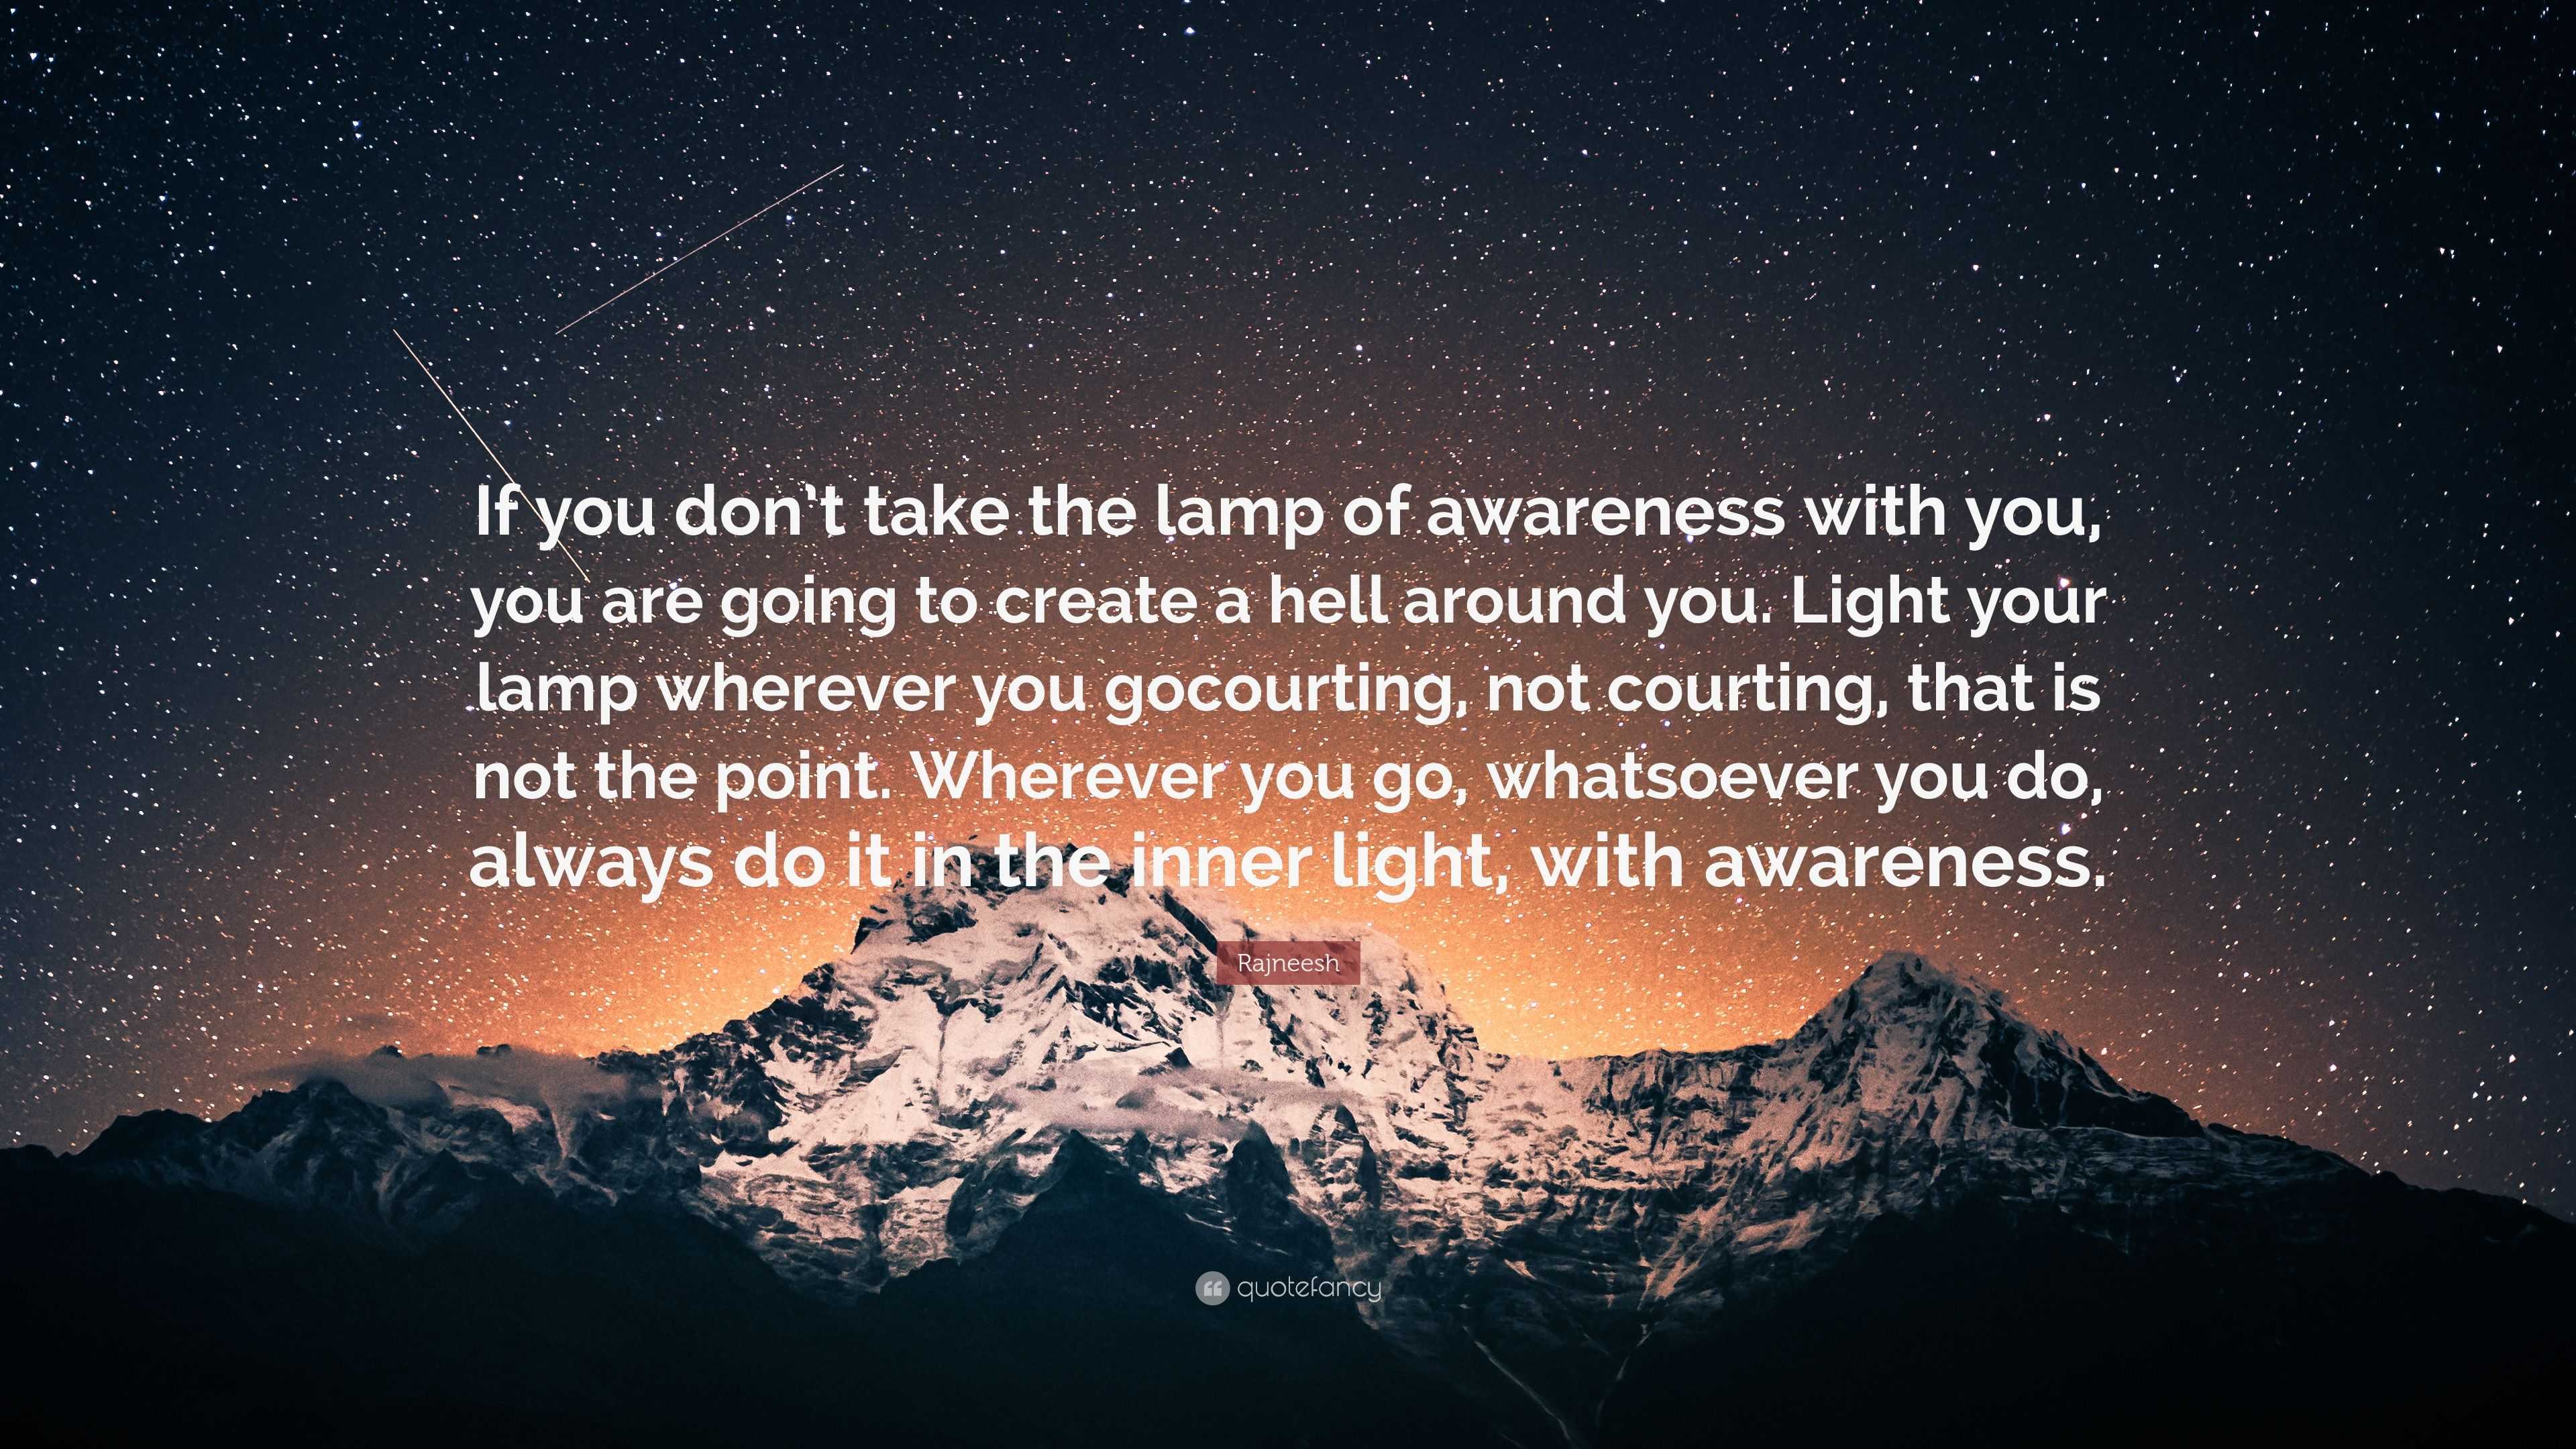 https://quotefancy.com/media/wallpaper/3840x2160/4309914-Rajneesh-Quote-If-you-don-t-take-the-lamp-of-awareness-with-you.jpg